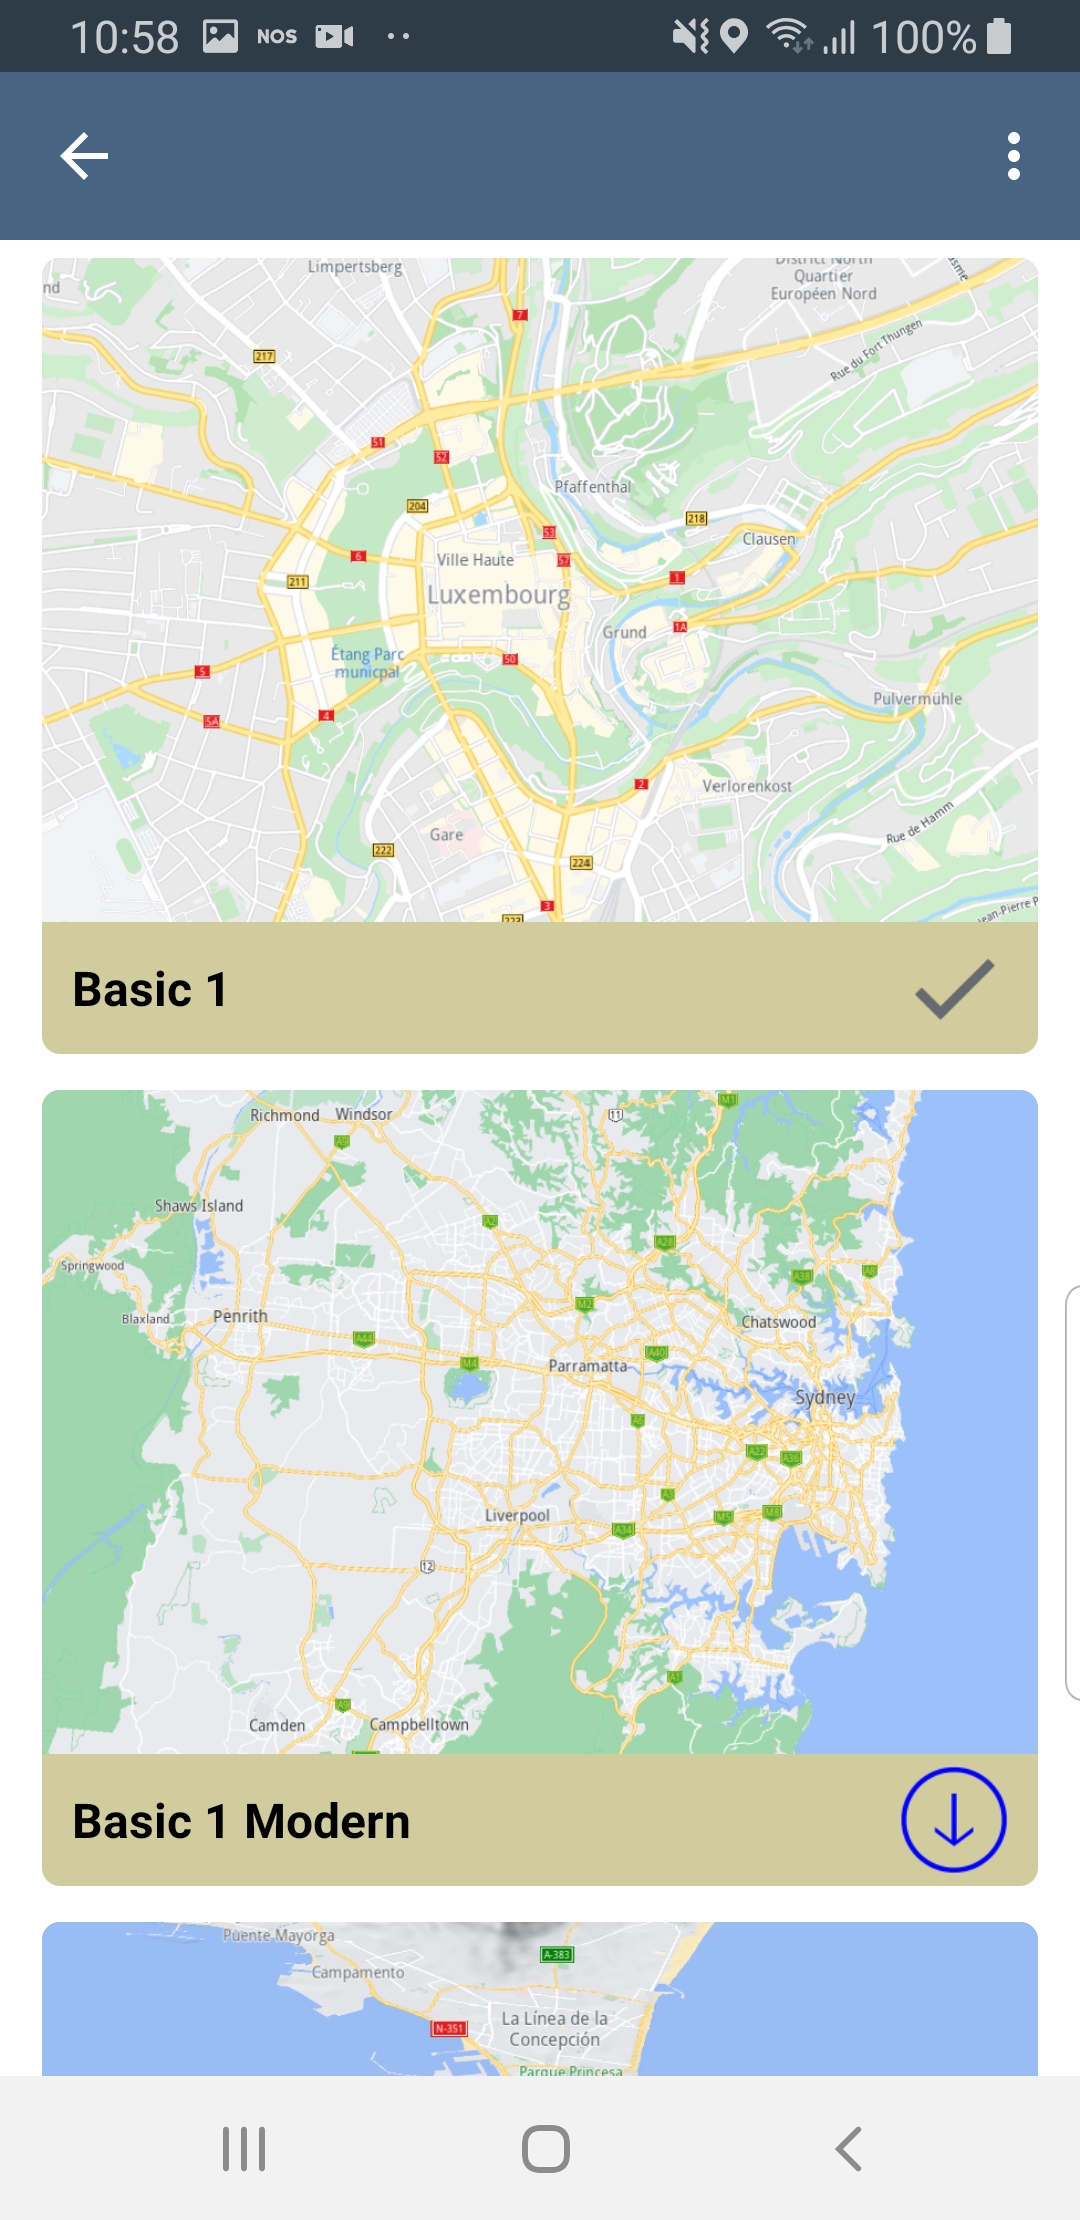 Android example map style screenshot